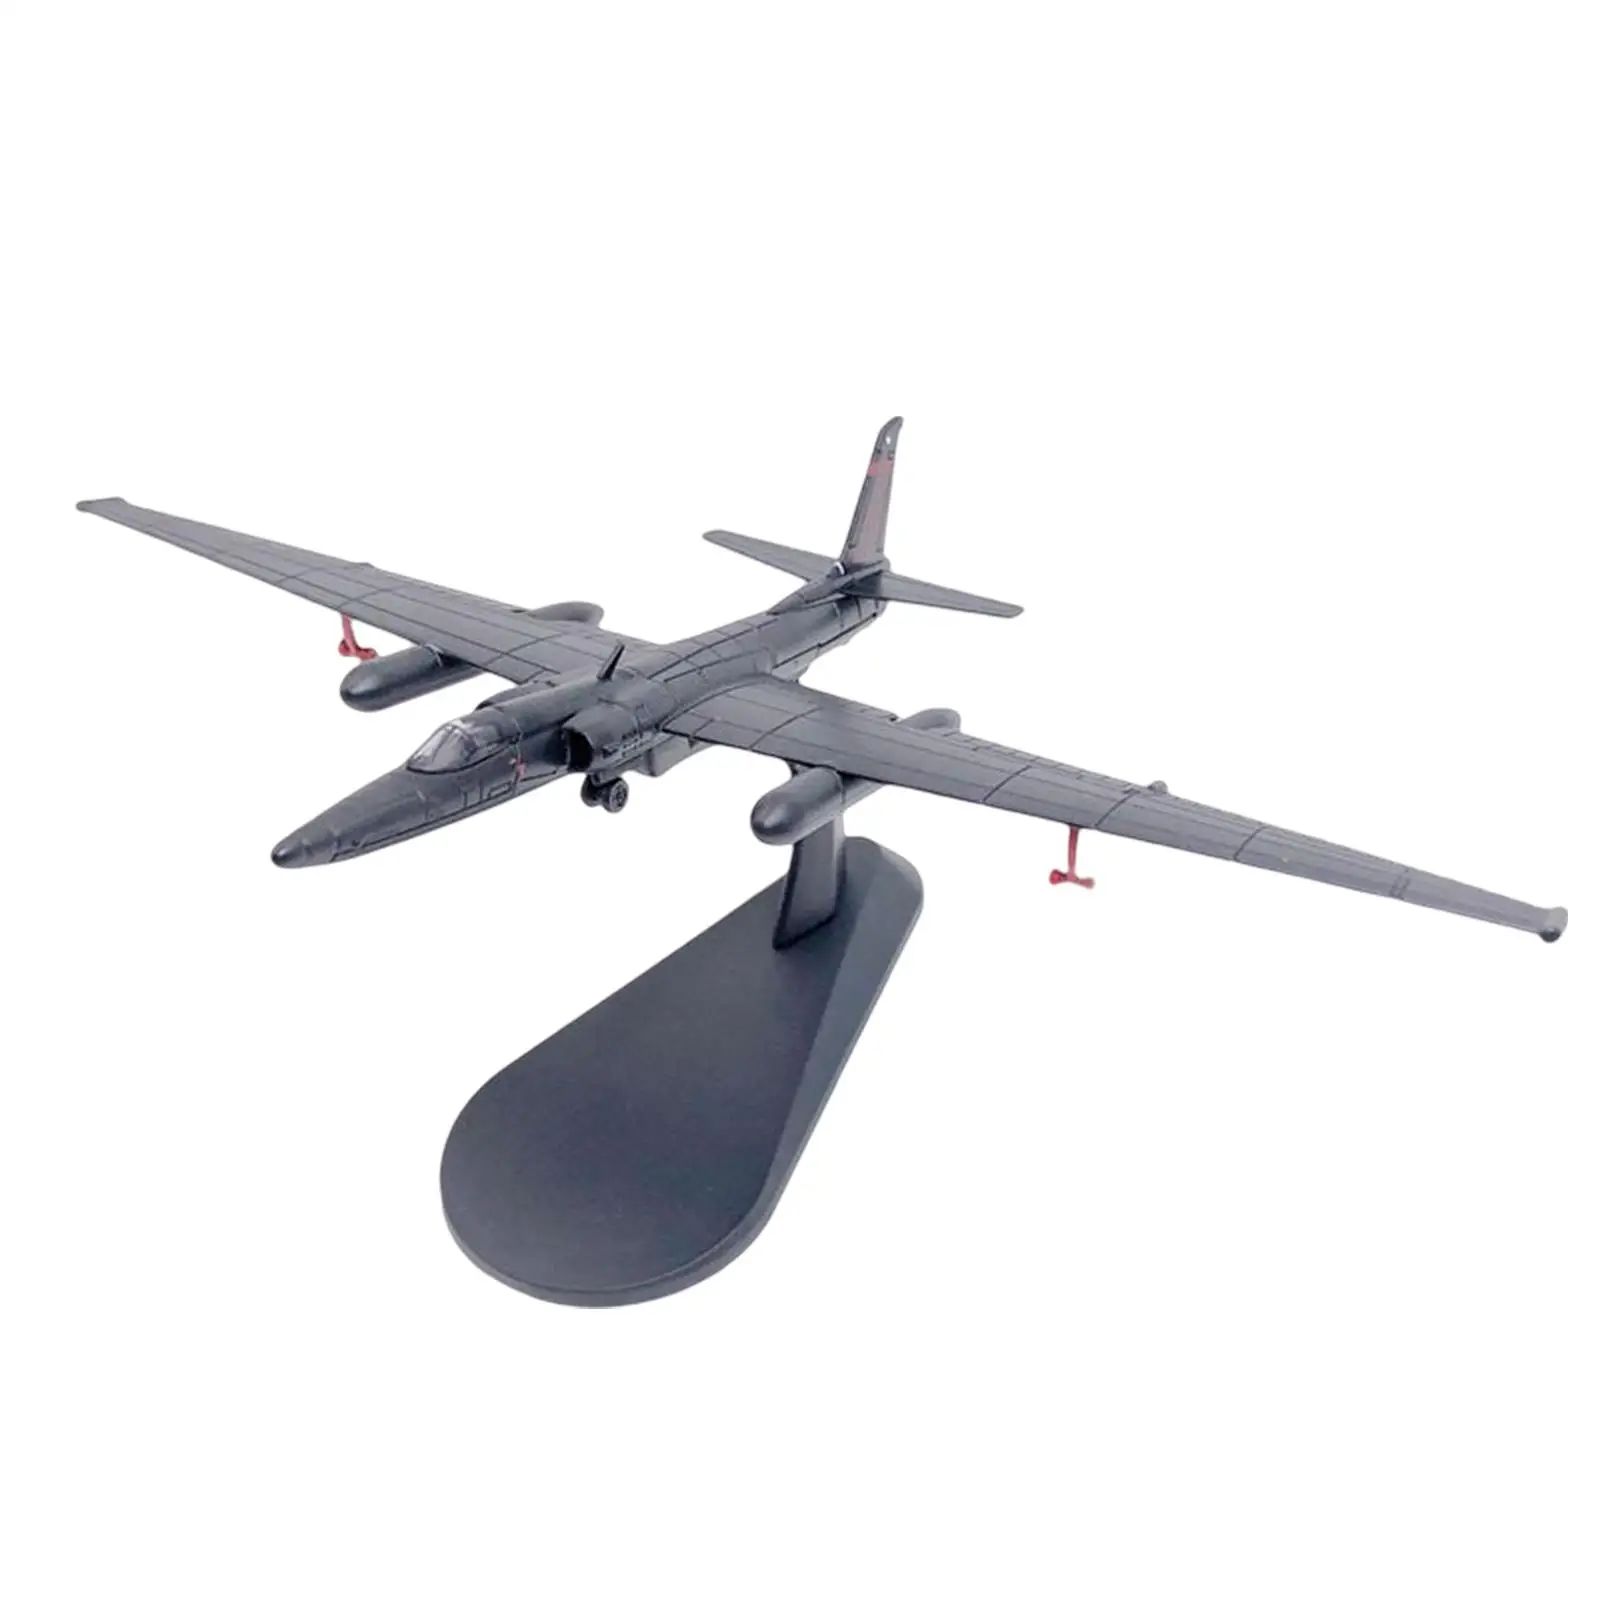 1:144 U2 Reconnaissance Airplane Model with Stand, ,13.5Cmx21.5cm Ornaments